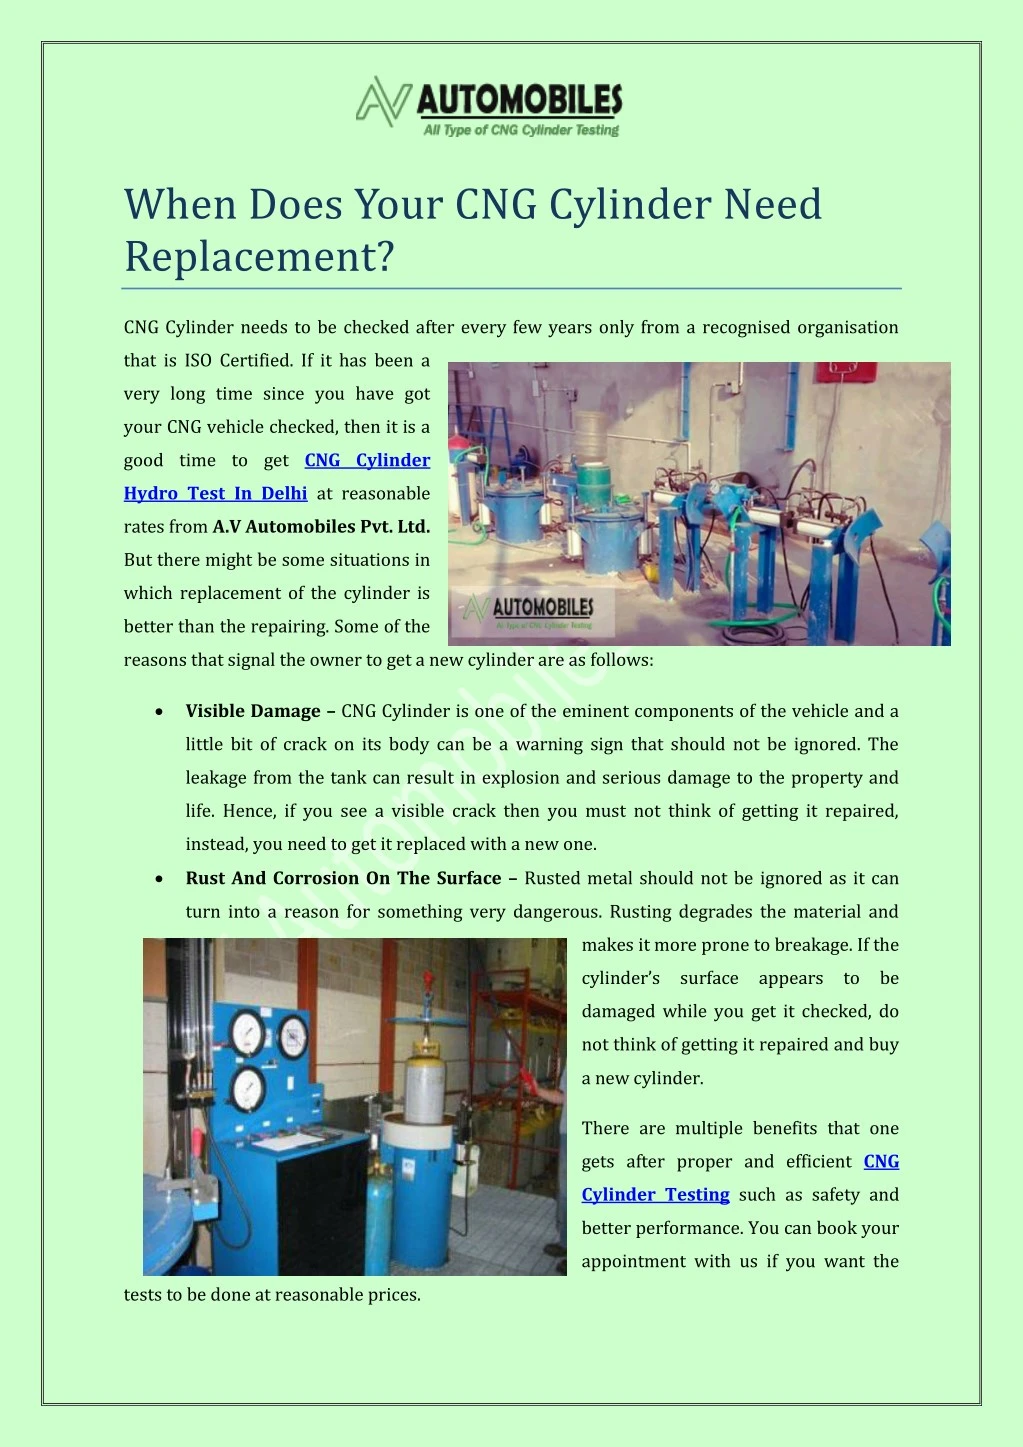 when does your cng cylinder need replacement